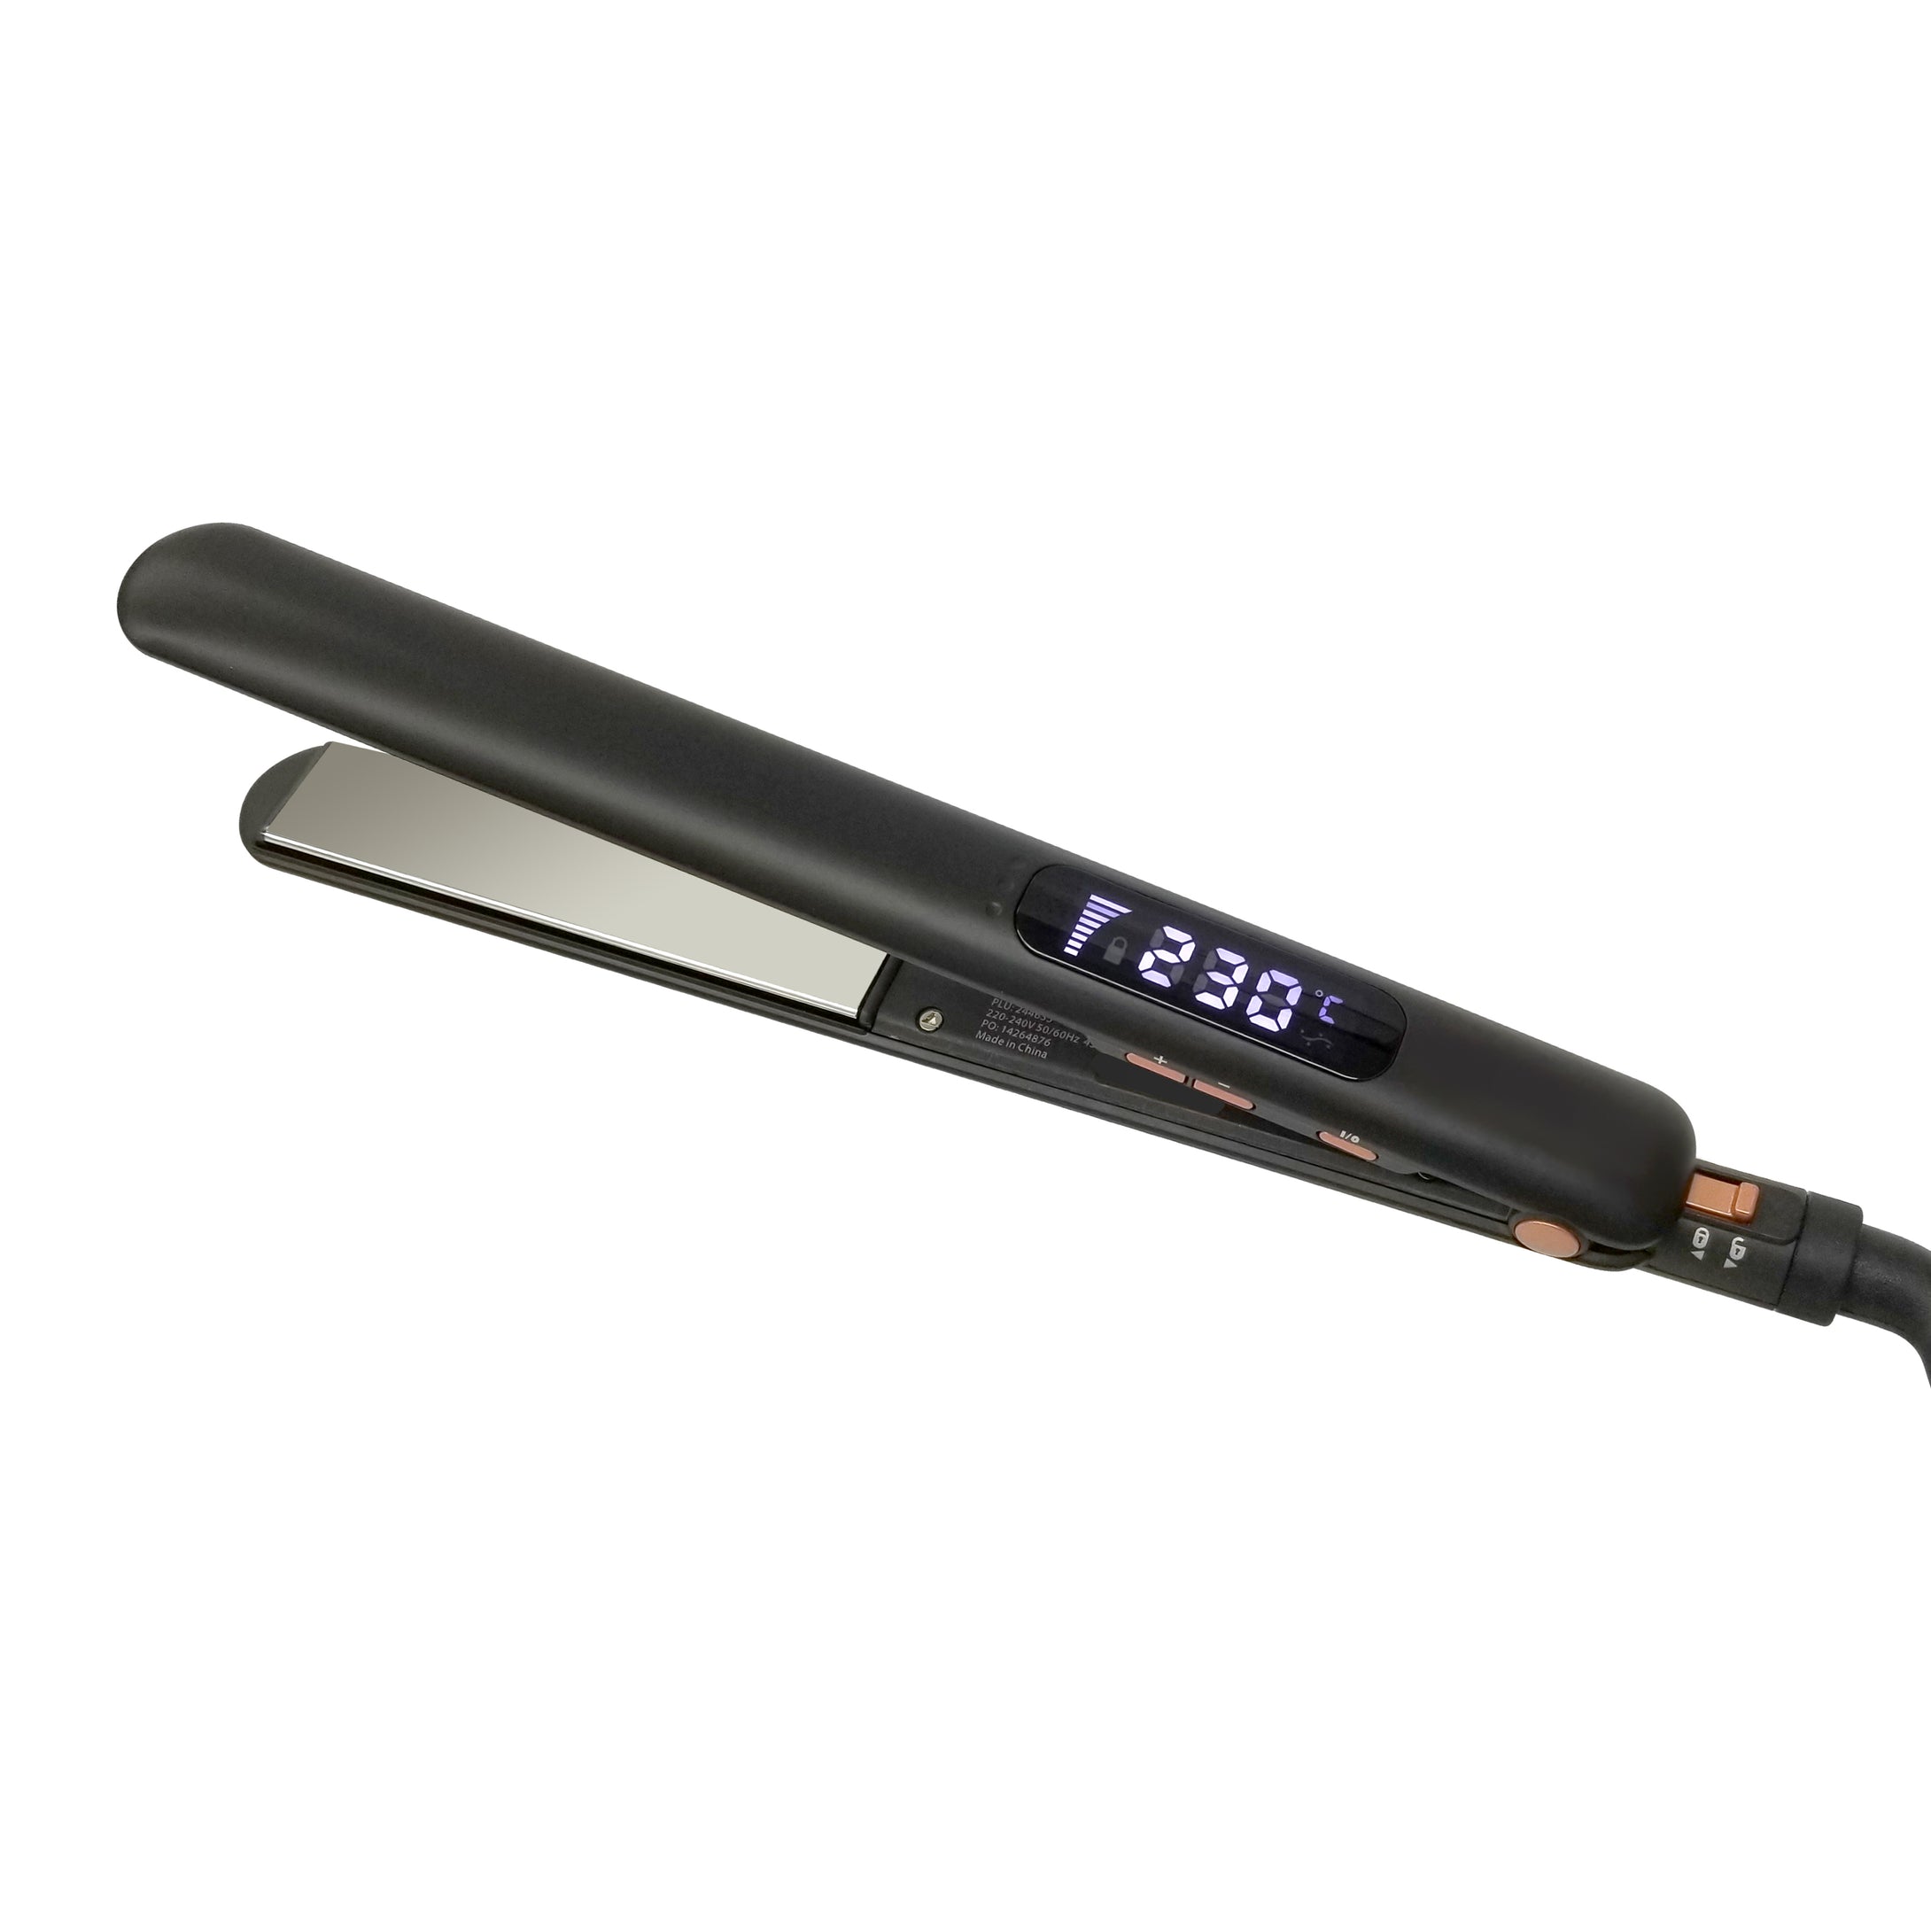 Titanium Plated Metal Hair Straightening and Curling Iron